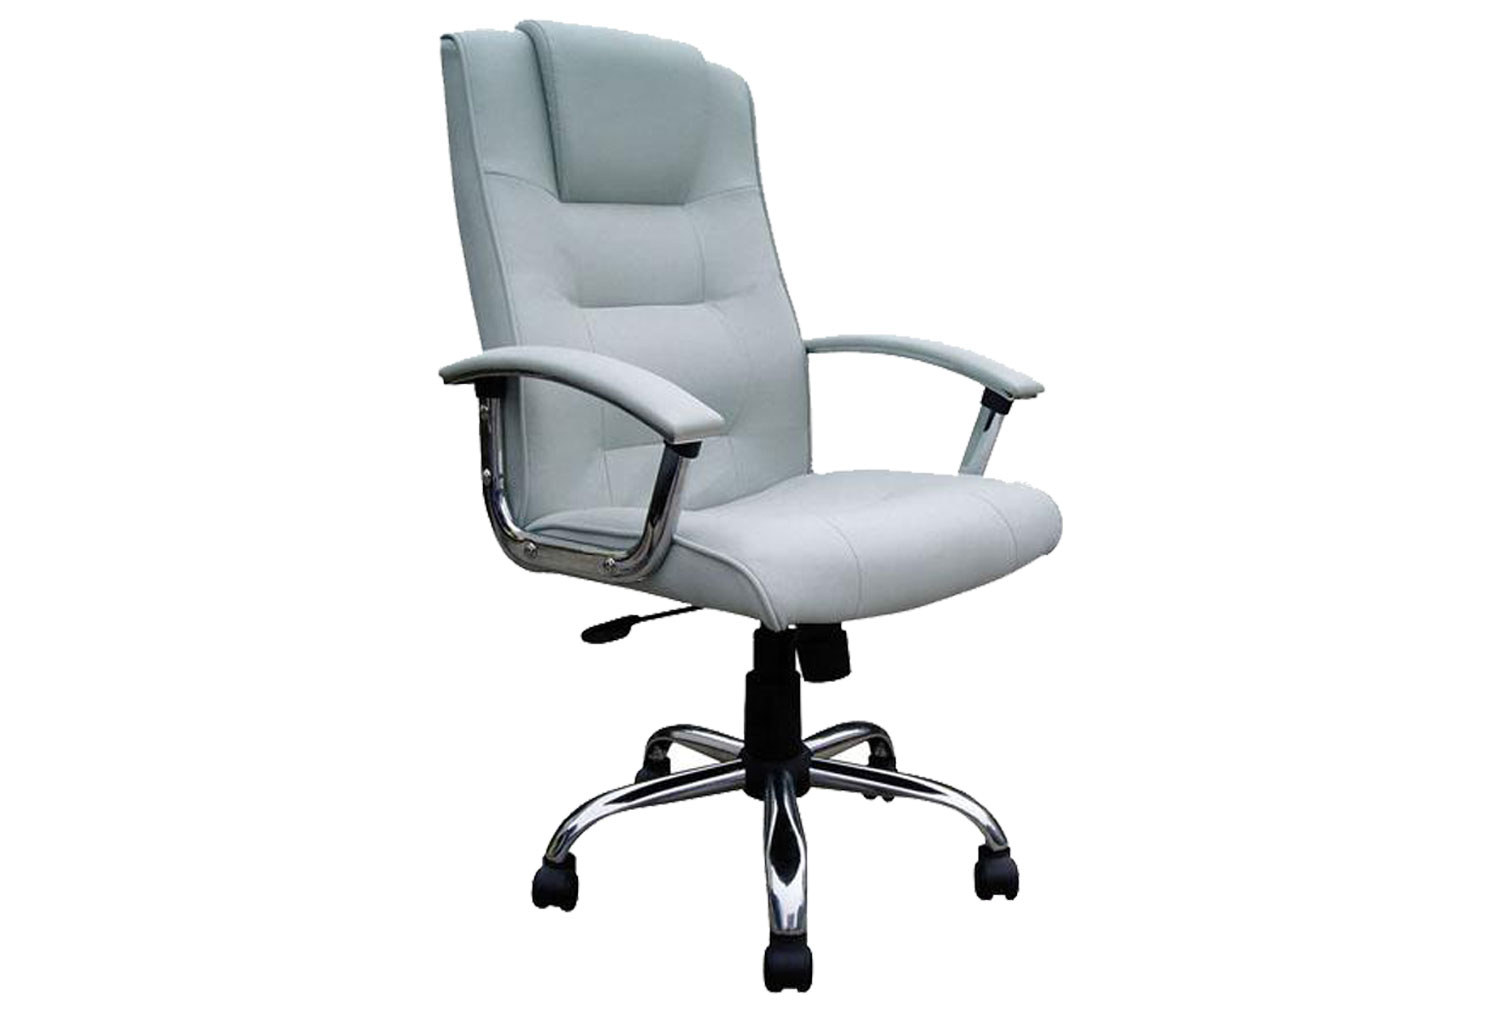 Skye High Back Silver Leather Faced Executive Office Chair, Fully Installed